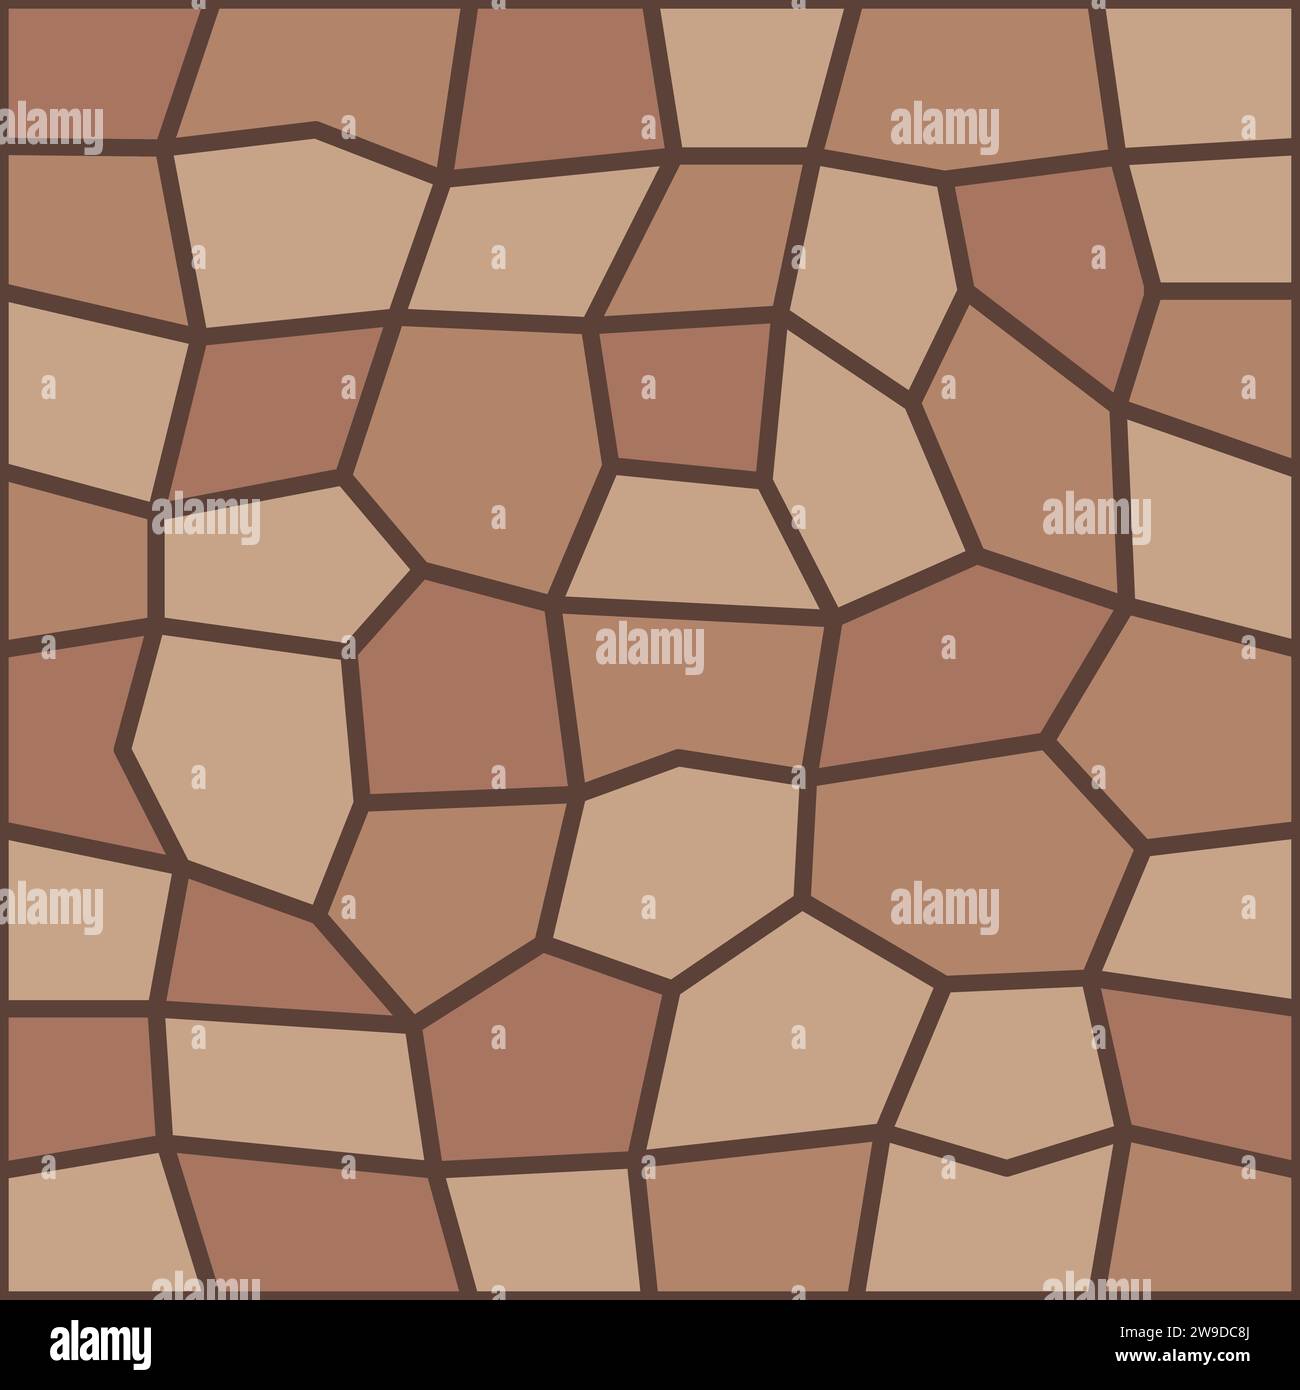 Brown pavement top view pattern, street cobblestone, garden sidewalk tile. Vector seamless background with intricate interlocked paving geometric bricks, pebble or blocks for patio and outdoor space Stock Vector